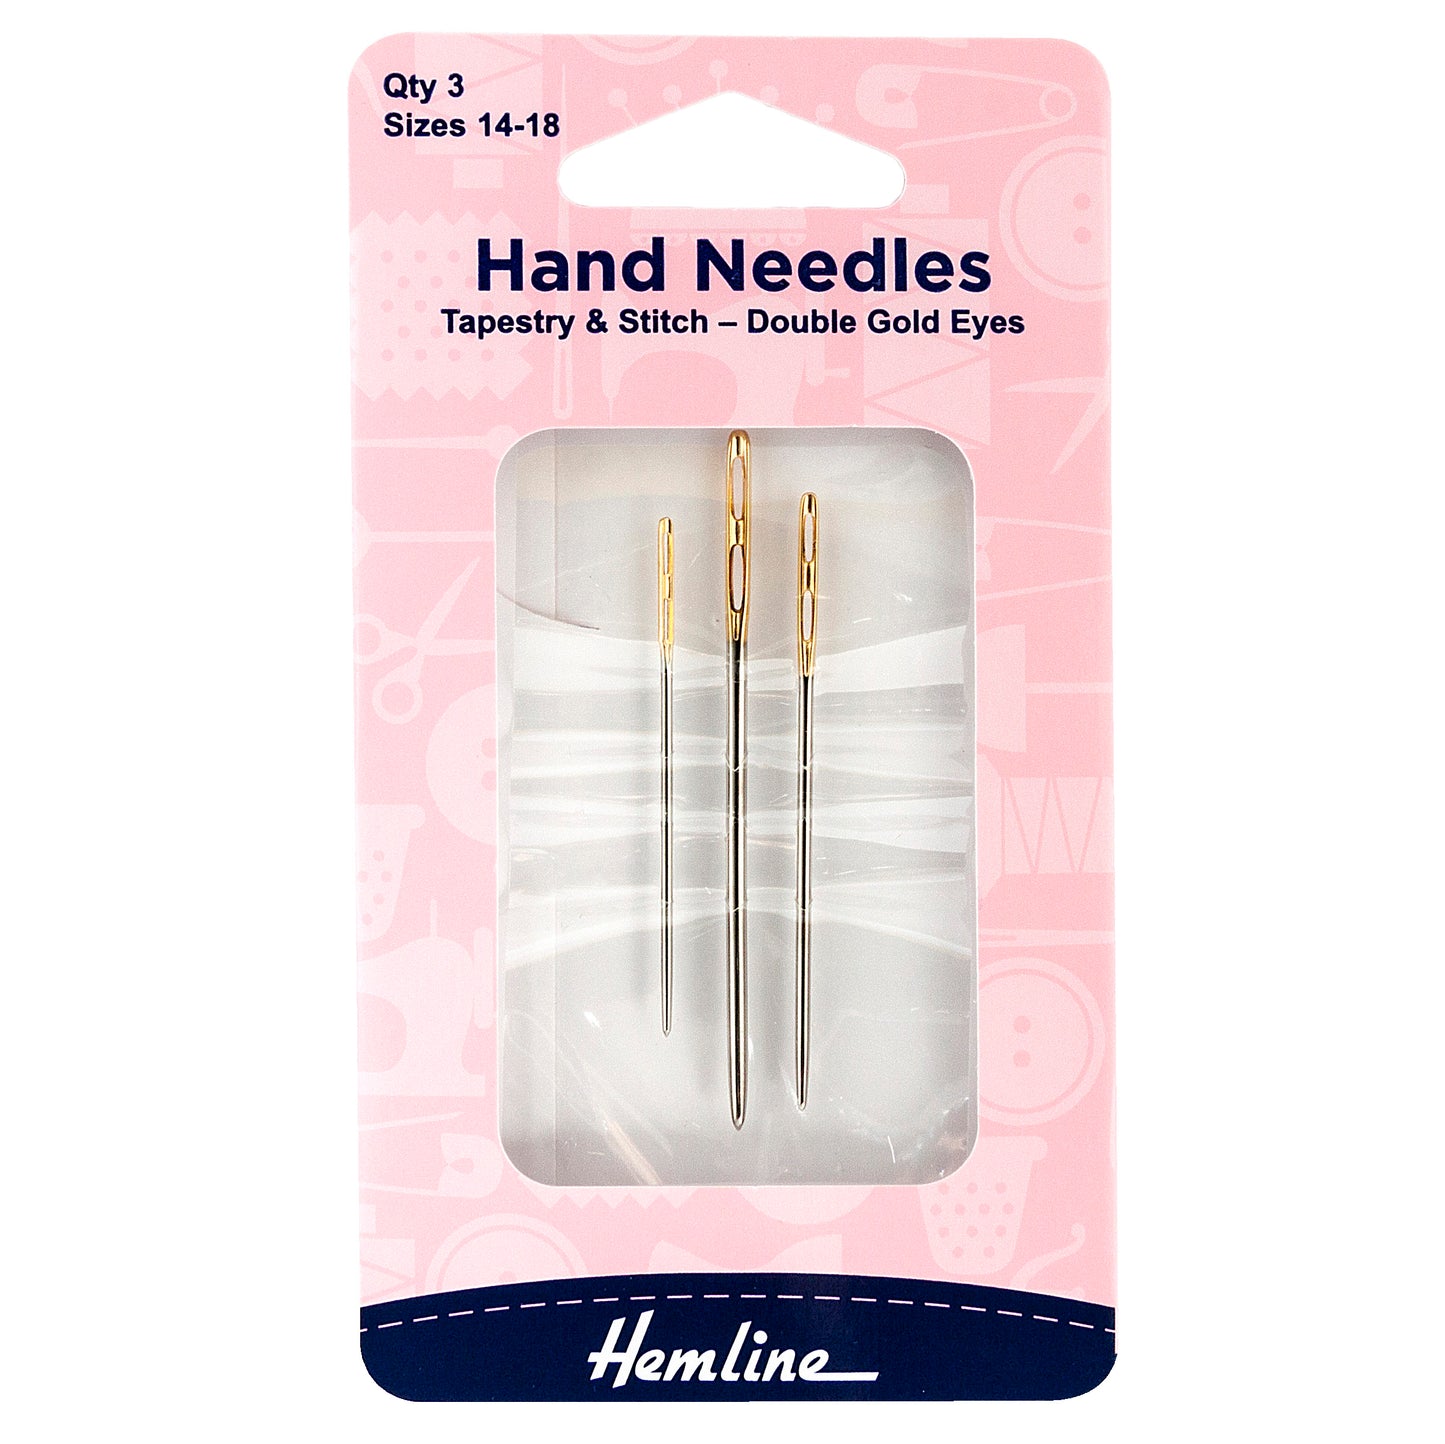 Hand Sewing Needles: Tapestry & Stitch: Double Gold Eye: Size 14-18: Pack of 3